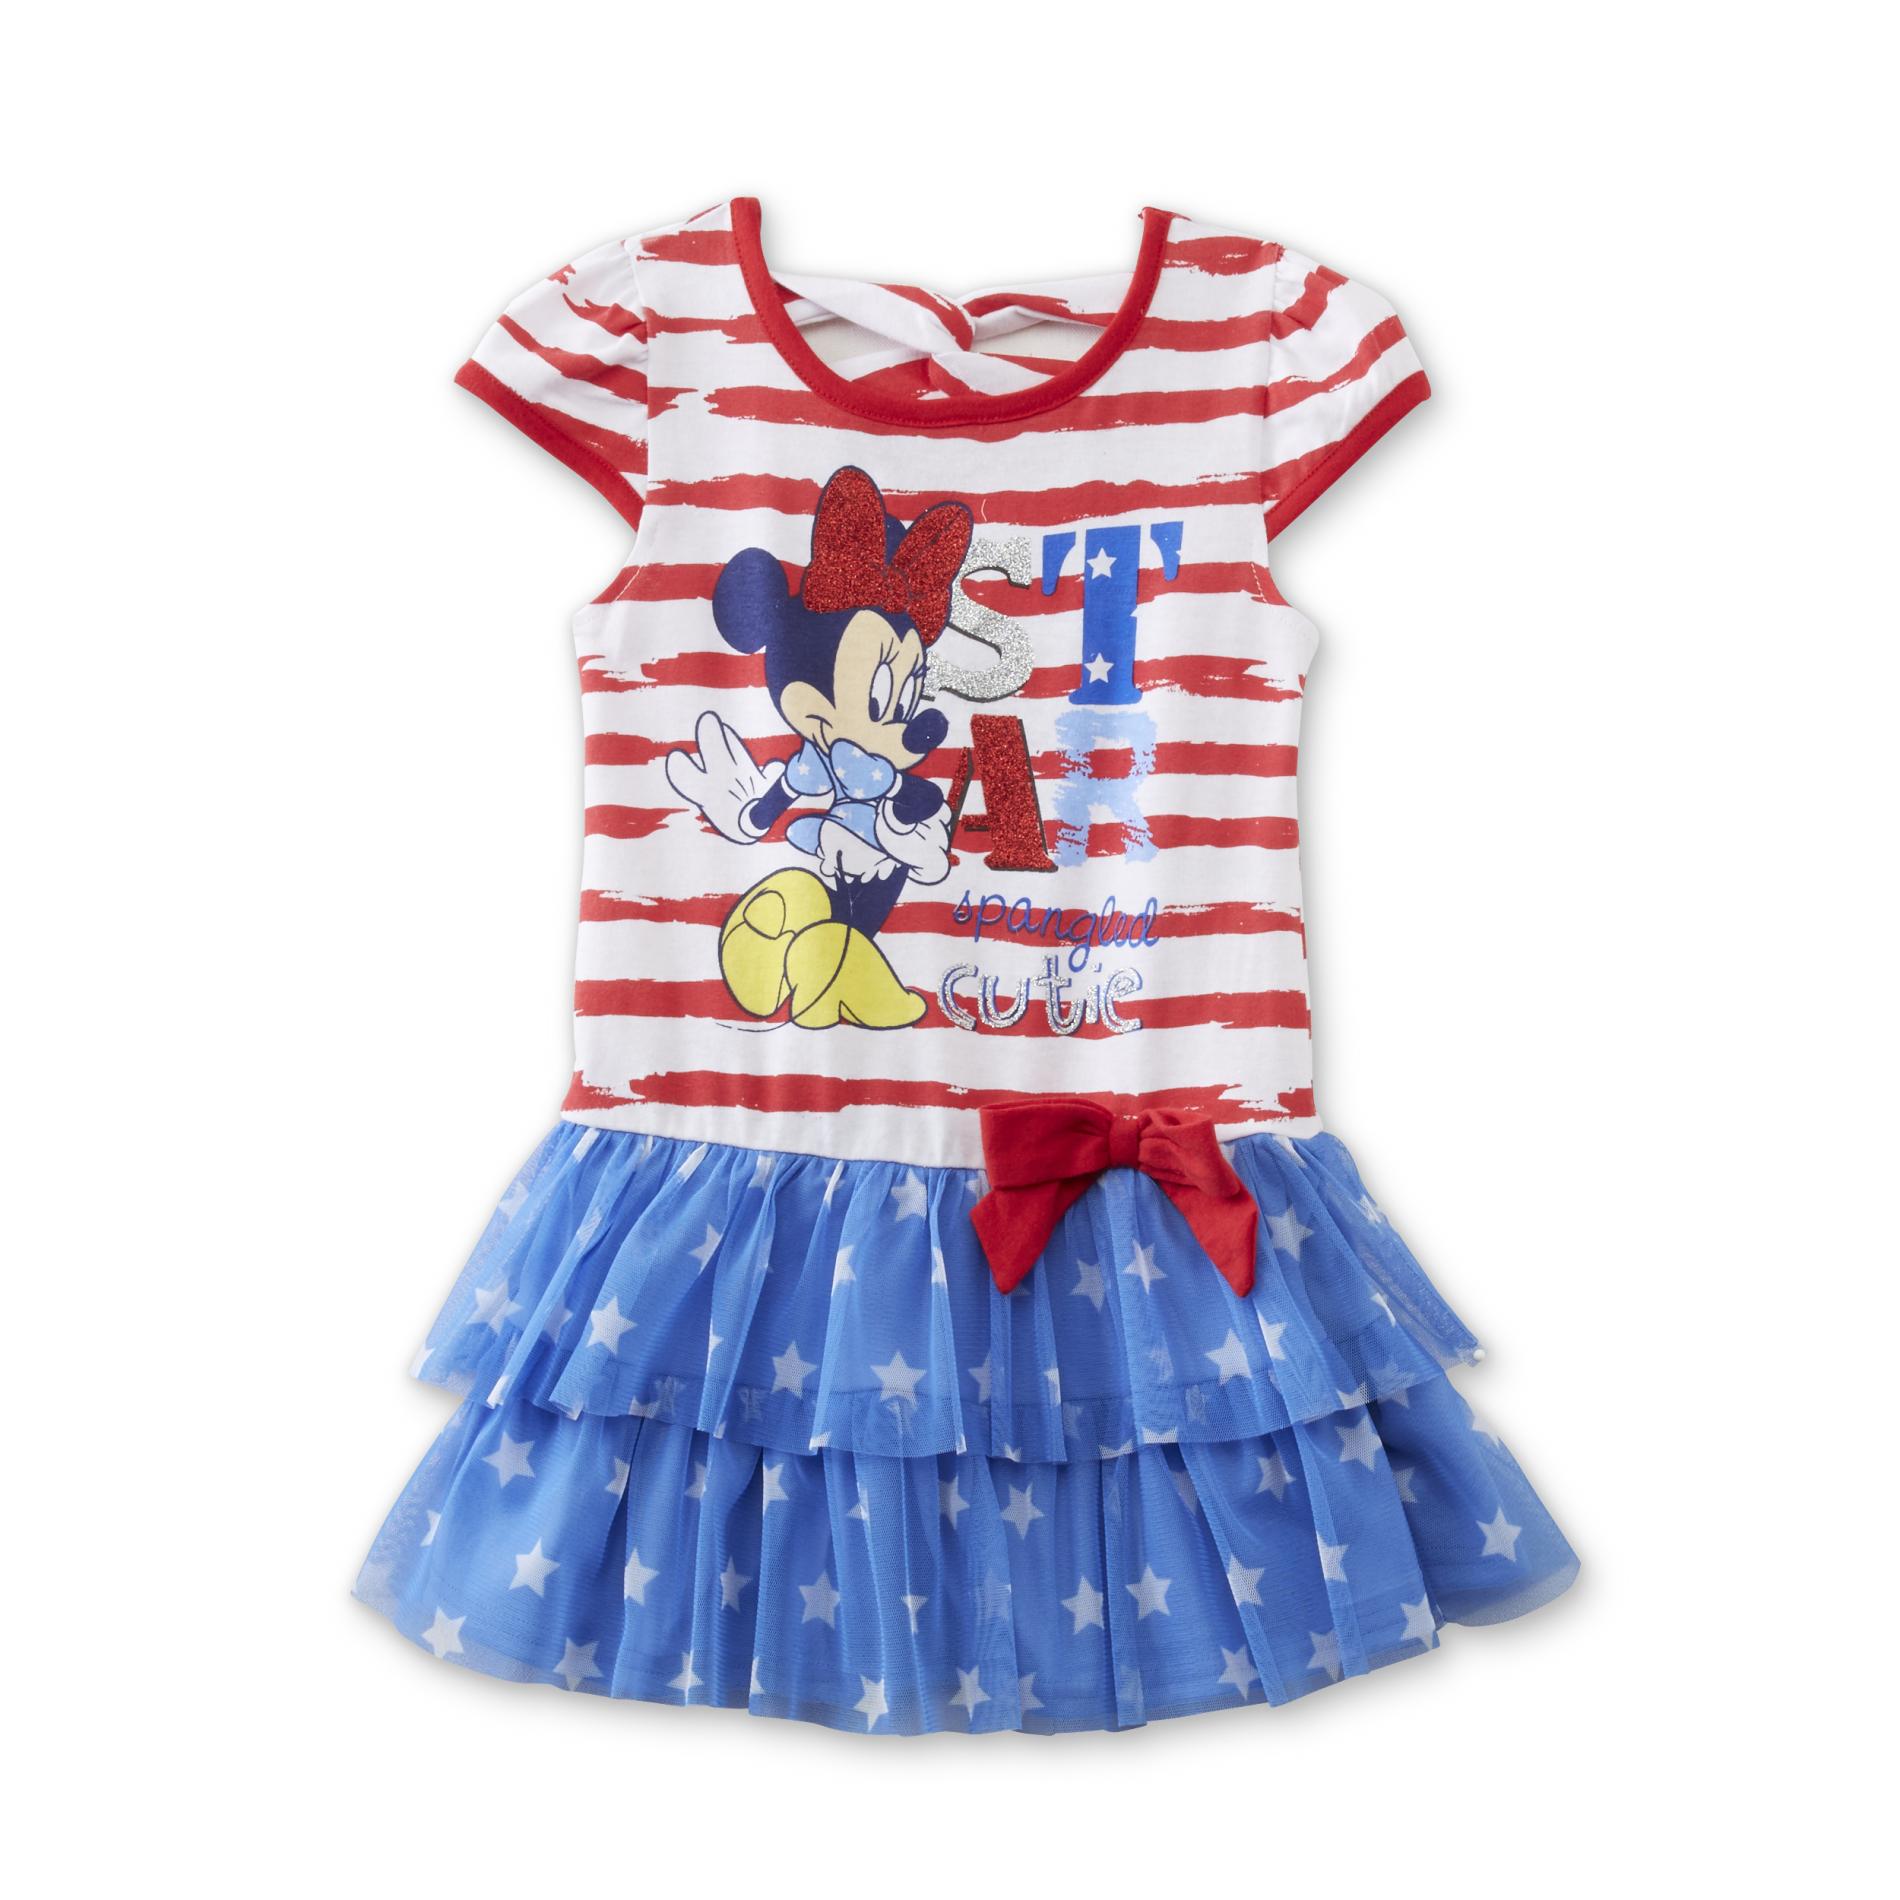 Minnie Mouse Infant & Toddler Girl's Patriotic Dress